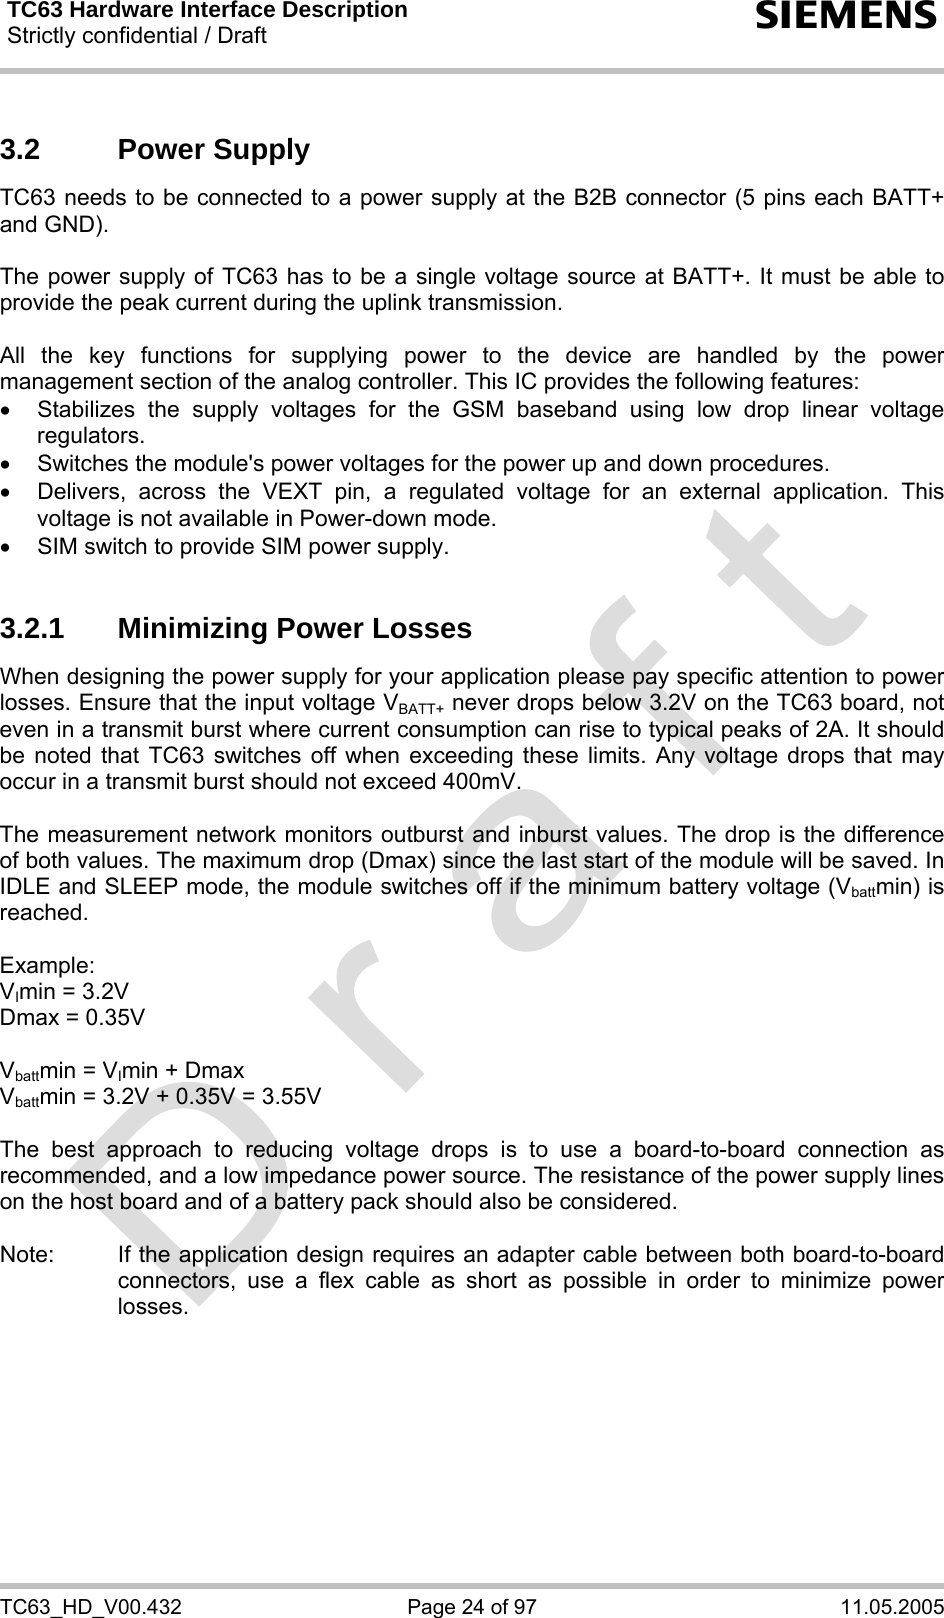 TC63 Hardware Interface Description Strictly confidential / Draft  s TC63_HD_V00.432  Page 24 of 97  11.05.2005 3.2 Power Supply TC63 needs to be connected to a power supply at the B2B connector (5 pins each BATT+ and GND).   The power supply of TC63 has to be a single voltage source at BATT+. It must be able to provide the peak current during the uplink transmission.   All the key functions for supplying power to the device are handled by the power management section of the analog controller. This IC provides the following features: • Stabilizes the supply voltages for the GSM baseband using low drop linear voltage regulators. •  Switches the module&apos;s power voltages for the power up and down procedures. •  Delivers, across the VEXT pin, a regulated voltage for an external application. This voltage is not available in Power-down mode. •  SIM switch to provide SIM power supply.  3.2.1  Minimizing Power Losses When designing the power supply for your application please pay specific attention to power losses. Ensure that the input voltage VBATT+ never drops below 3.2V on the TC63 board, not even in a transmit burst where current consumption can rise to typical peaks of 2A. It should be noted that TC63 switches off when exceeding these limits. Any voltage drops that may occur in a transmit burst should not exceed 400mV.  The measurement network monitors outburst and inburst values. The drop is the difference of both values. The maximum drop (Dmax) since the last start of the module will be saved. In IDLE and SLEEP mode, the module switches off if the minimum battery voltage (Vbattmin) is reached.  Example:  VImin = 3.2V Dmax = 0.35V  Vbattmin = VImin + Dmax Vbattmin = 3.2V + 0.35V = 3.55V  The best approach to reducing voltage drops is to use a board-to-board connection as recommended, and a low impedance power source. The resistance of the power supply lines on the host board and of a battery pack should also be considered.  Note:  If the application design requires an adapter cable between both board-to-board connectors, use a flex cable as short as possible in order to minimize power losses.   